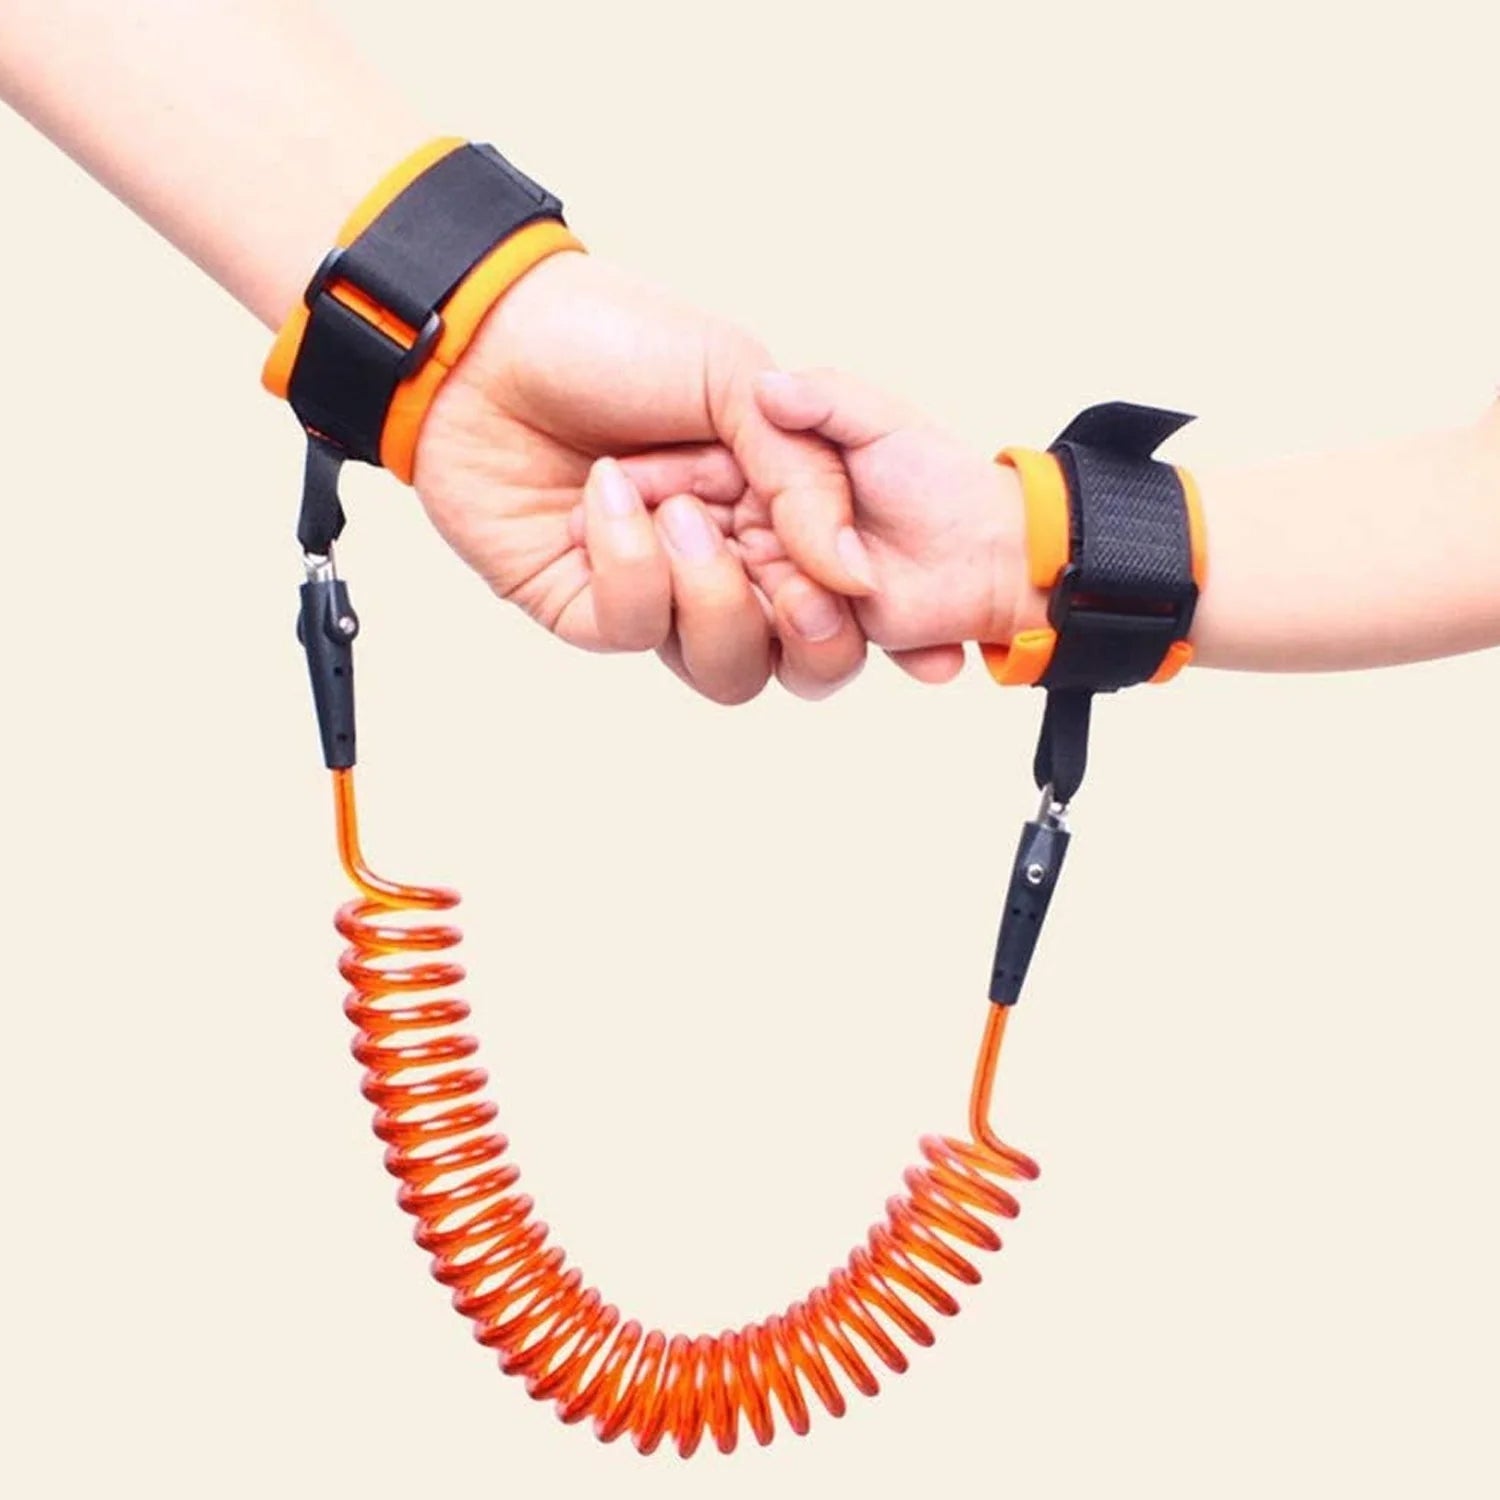 0371 Baby Safety Rope, Anti Lost Safety Wrist Bracelet for Baby Child,with Extra Long Harness Strap Walking Hand Belt, Comfortable Children's Harness for Toddlers Kids (Maximum length to 2.5M)